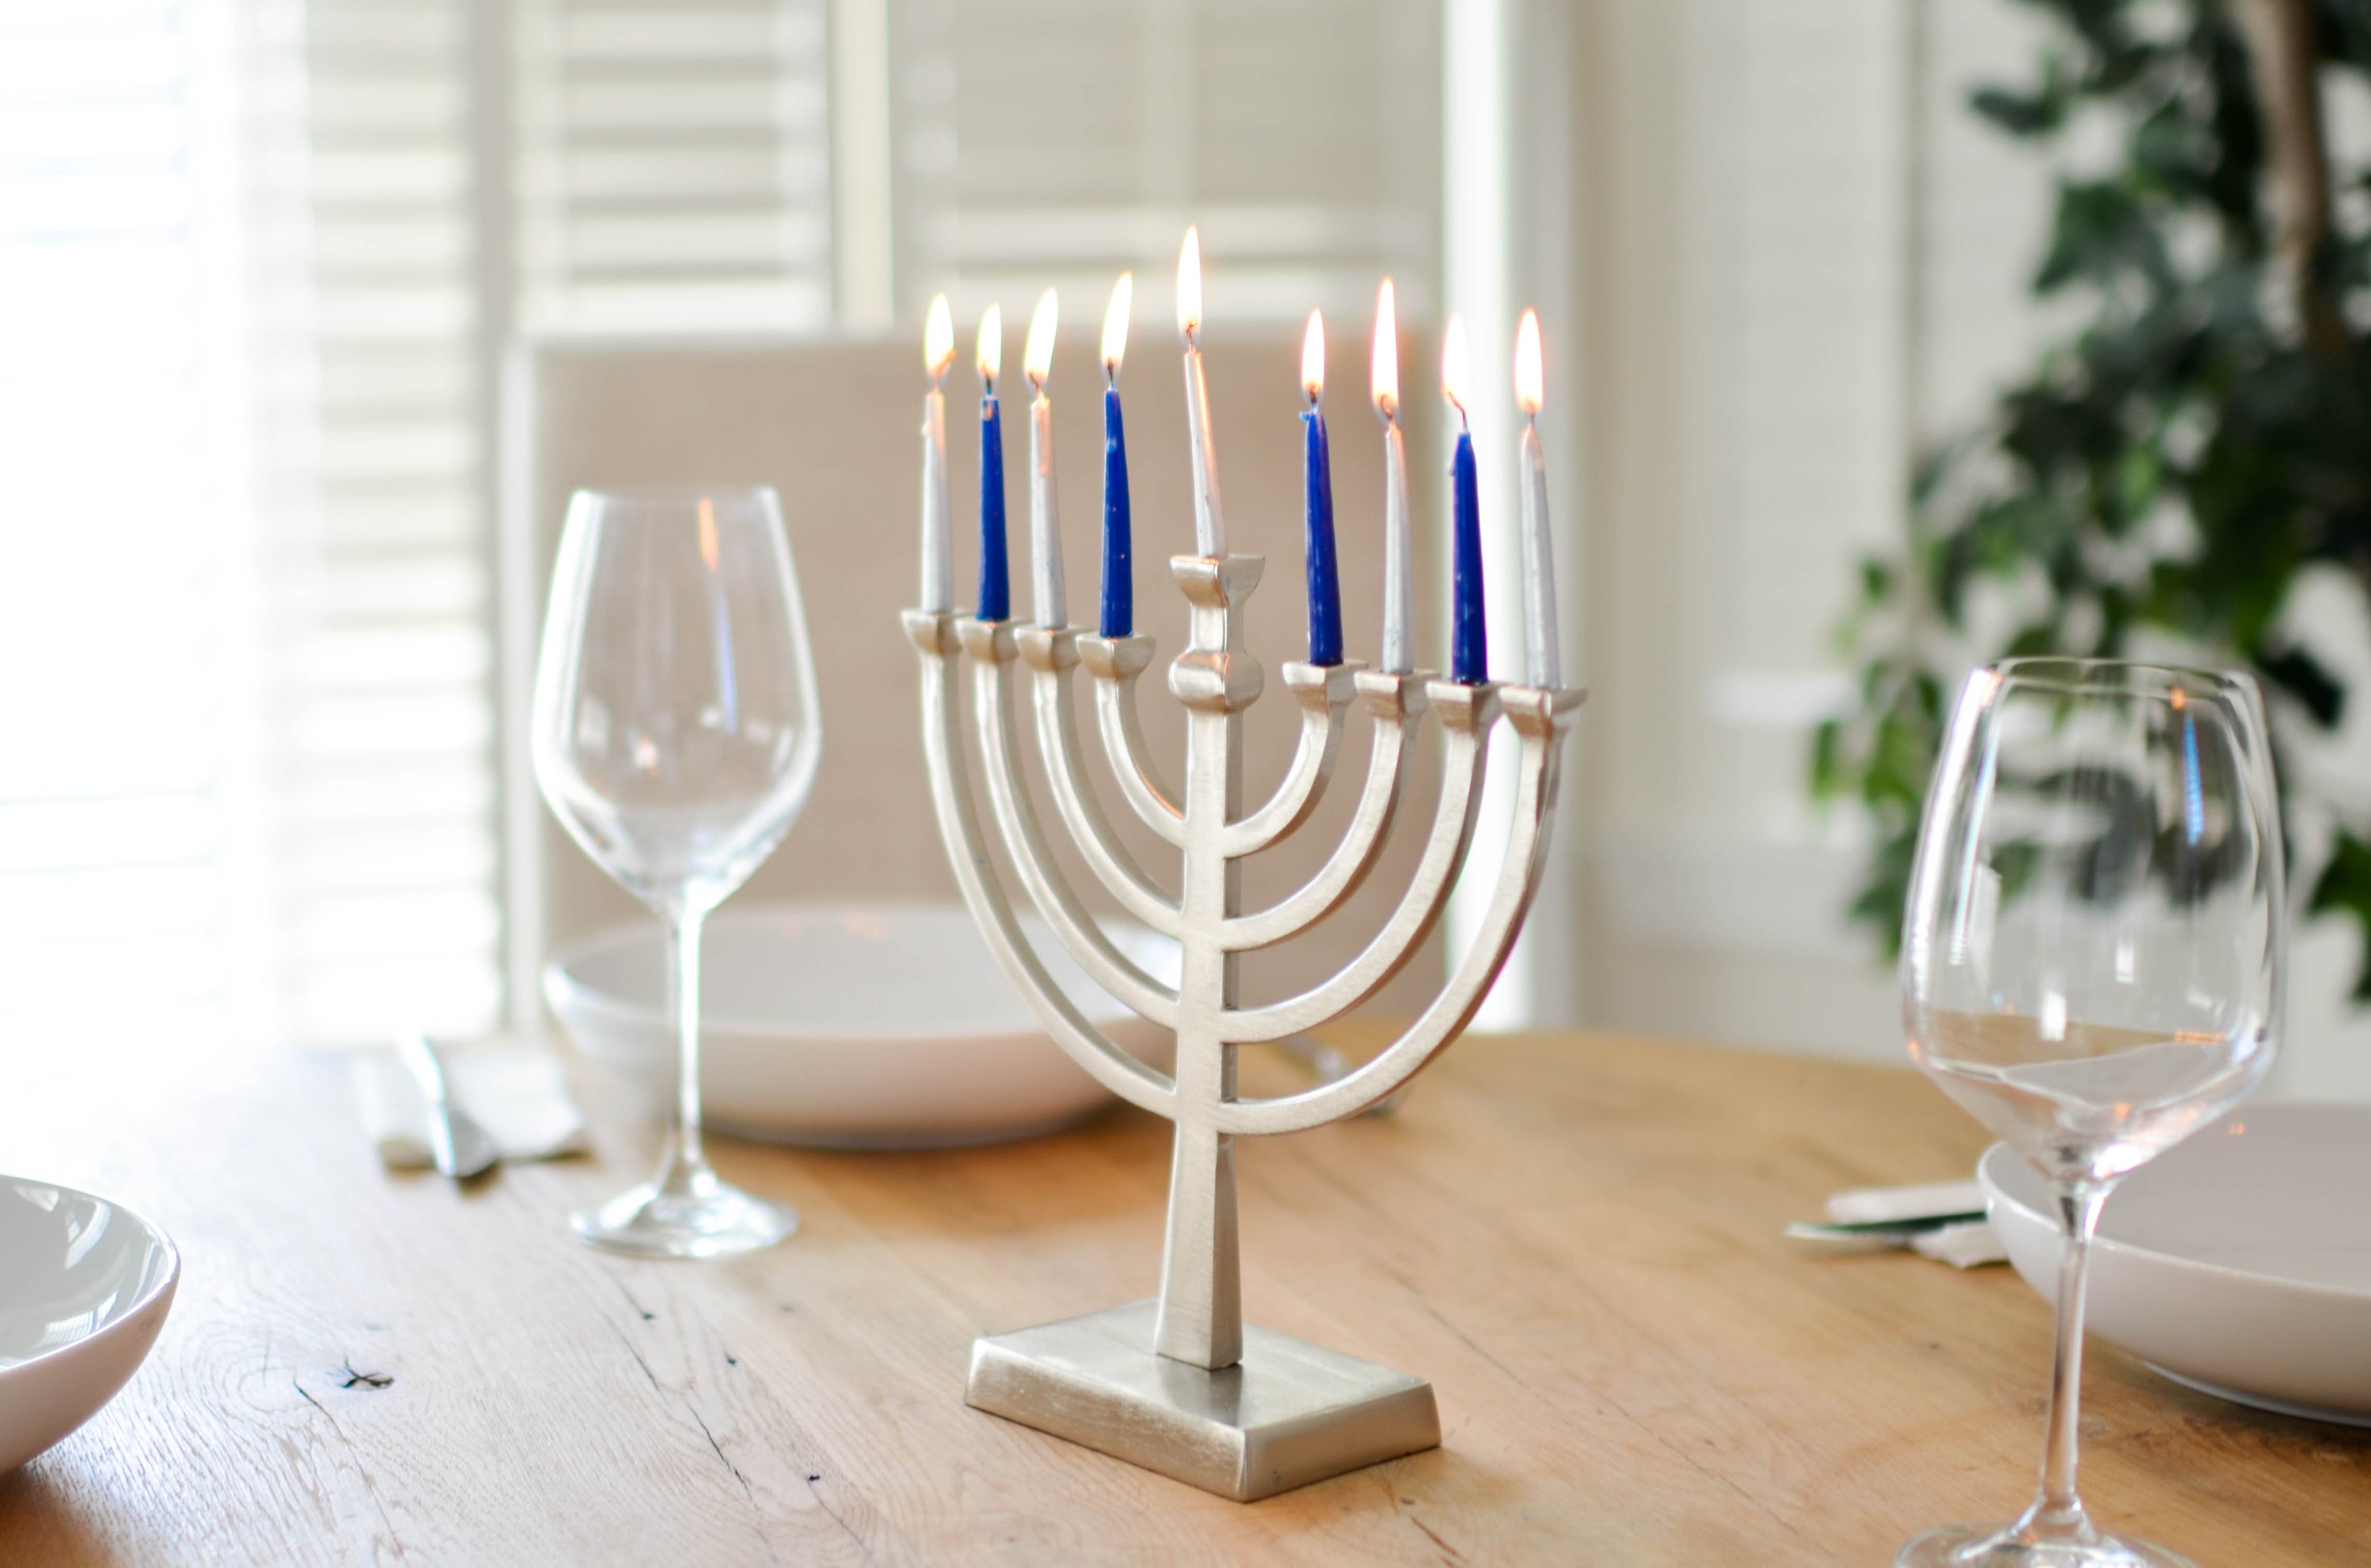 Light Up the Season: Your Ultimate Guide to Thoughtful Hanukkah Gift Giving